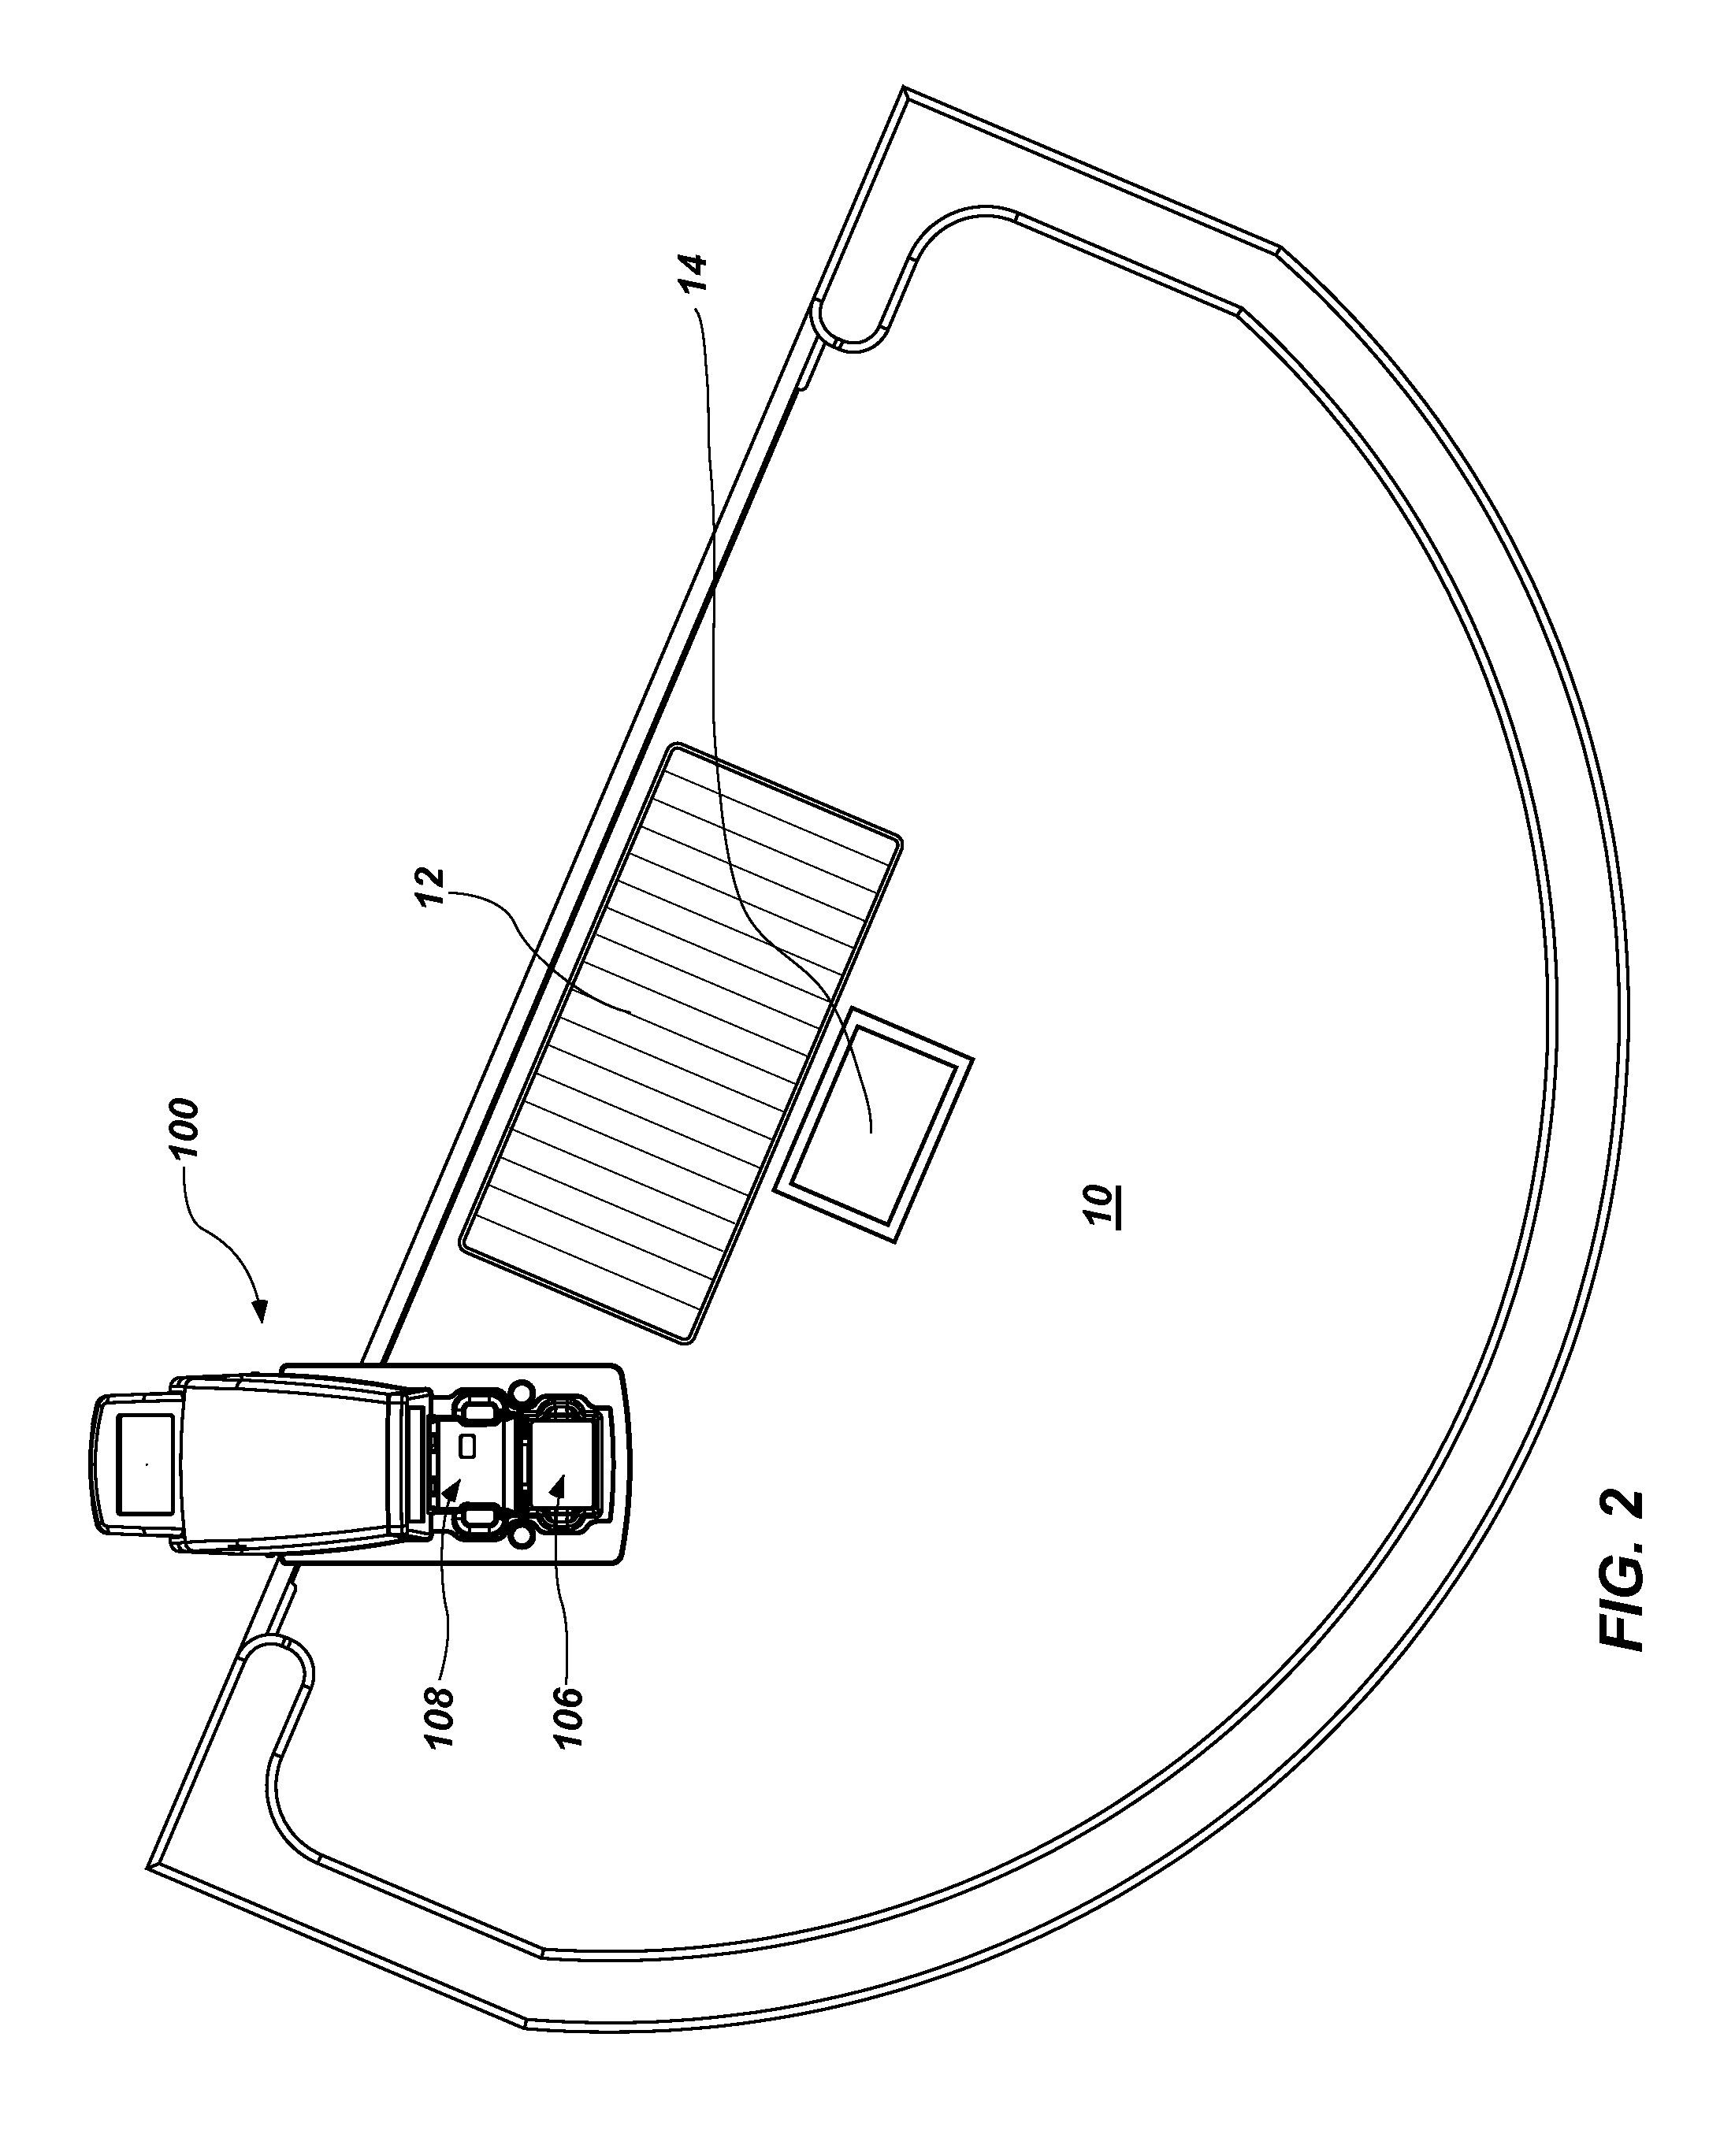 Hand-forming card shuffling apparatuses including multi-card storage compartments, and related methods